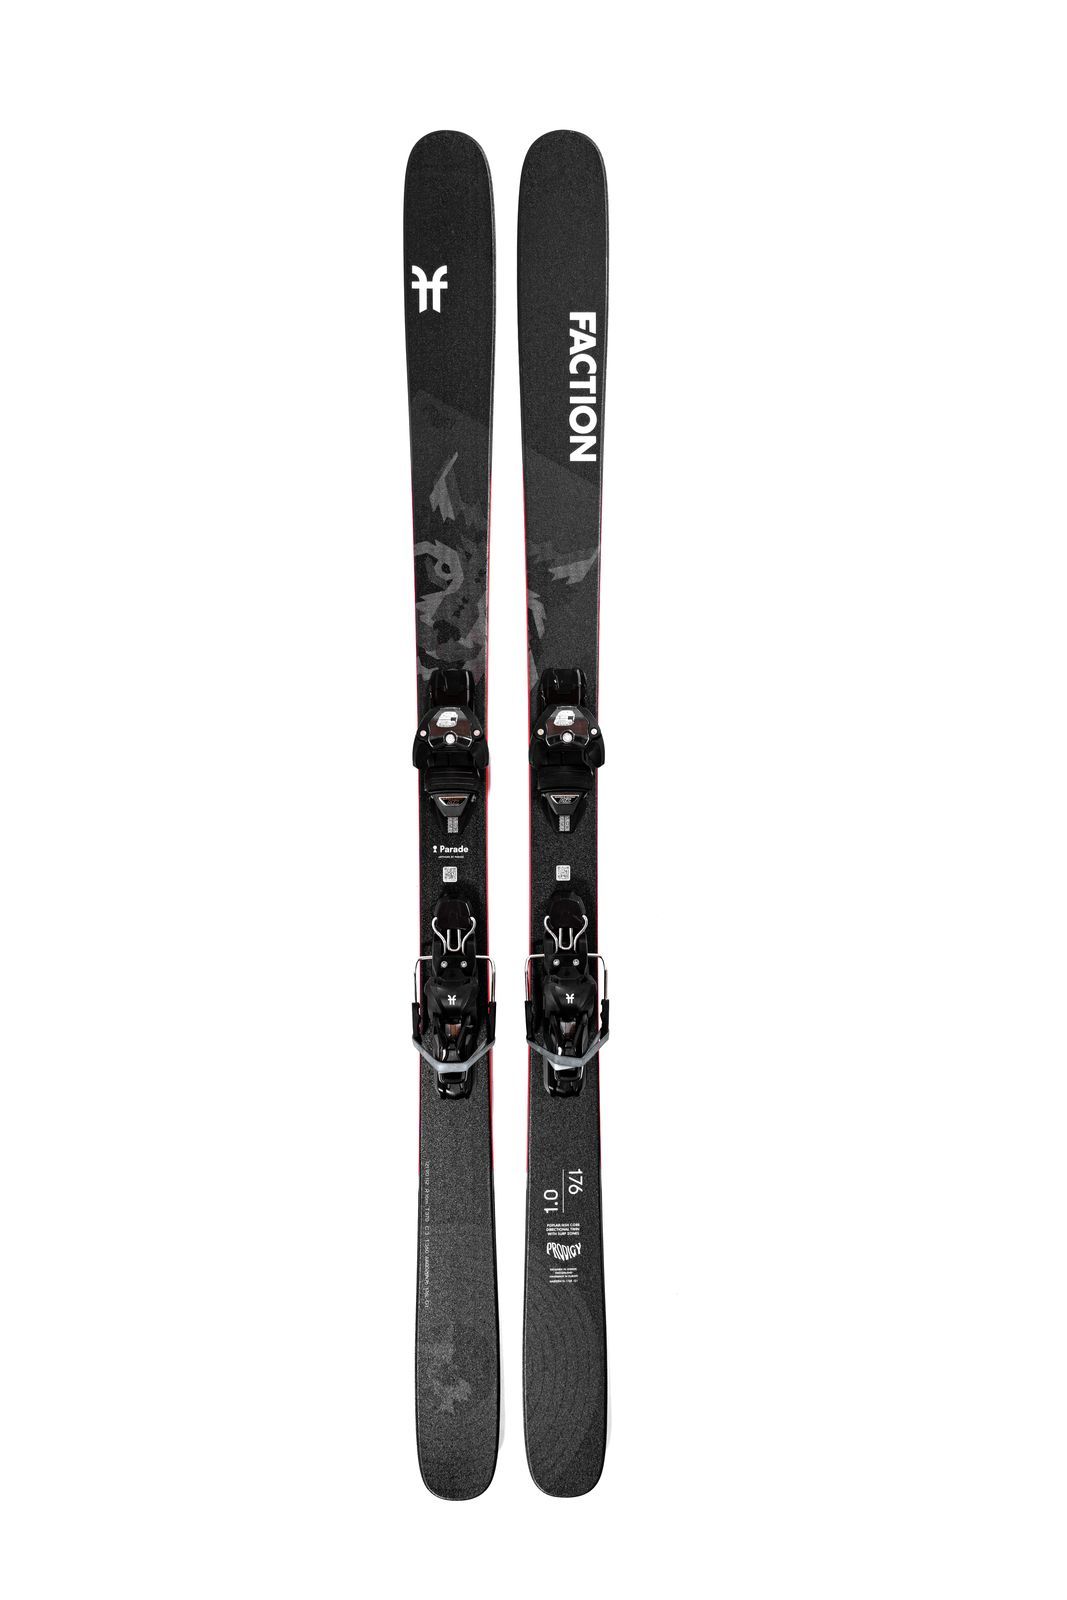 Pack skis Prodigy 1.0 RT 2021 + Fixations Warden 11